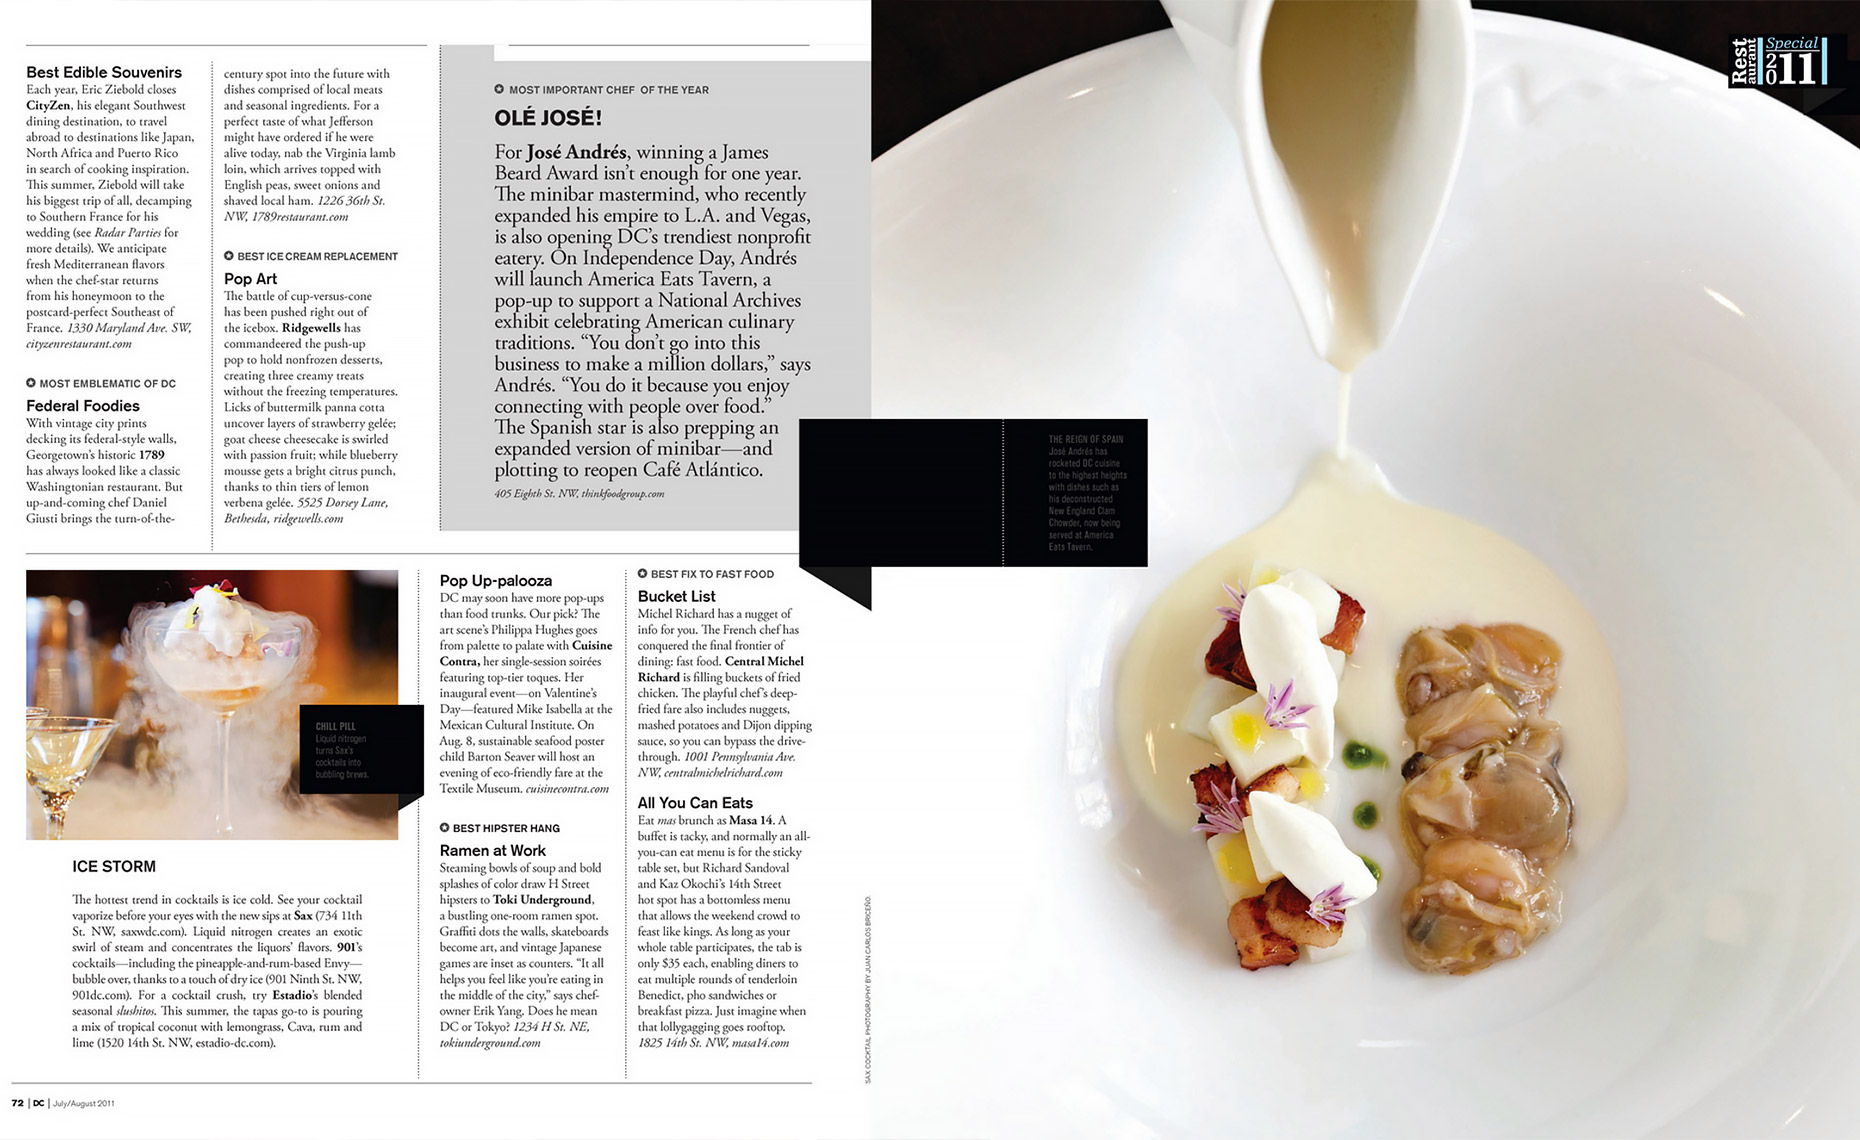 REST-Articles66-Restaurant-Issue